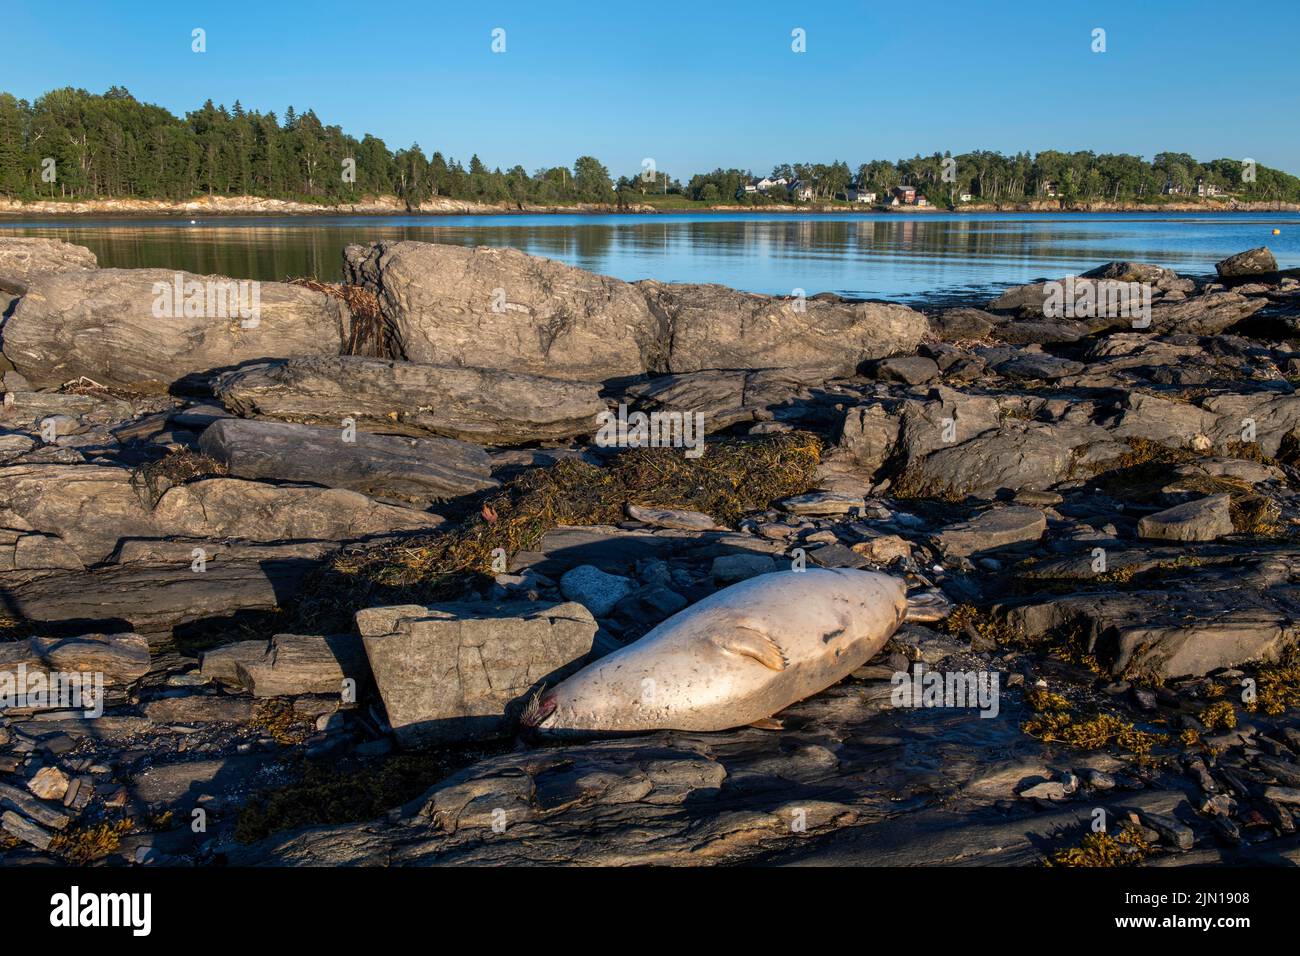 July 6, 2022.  7:30pm.  Dead seal washed in Gulf of Maine.   Bird flu has jumped to seals and some are dying. Stock Photo